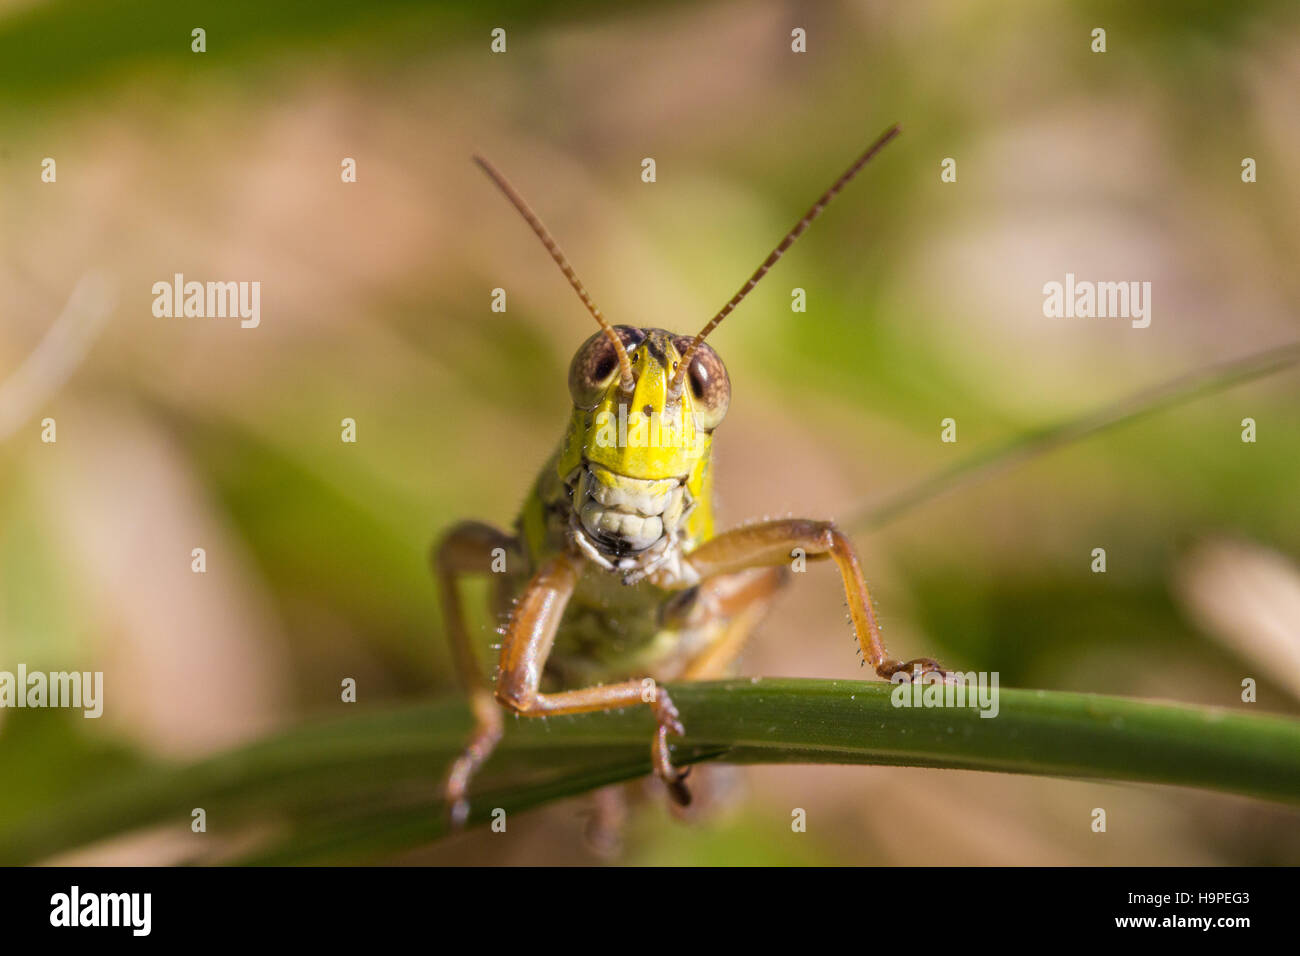 Face / head of a spur-throated grasshopper (Melanoplinae), Indiana, United States Stock Photo